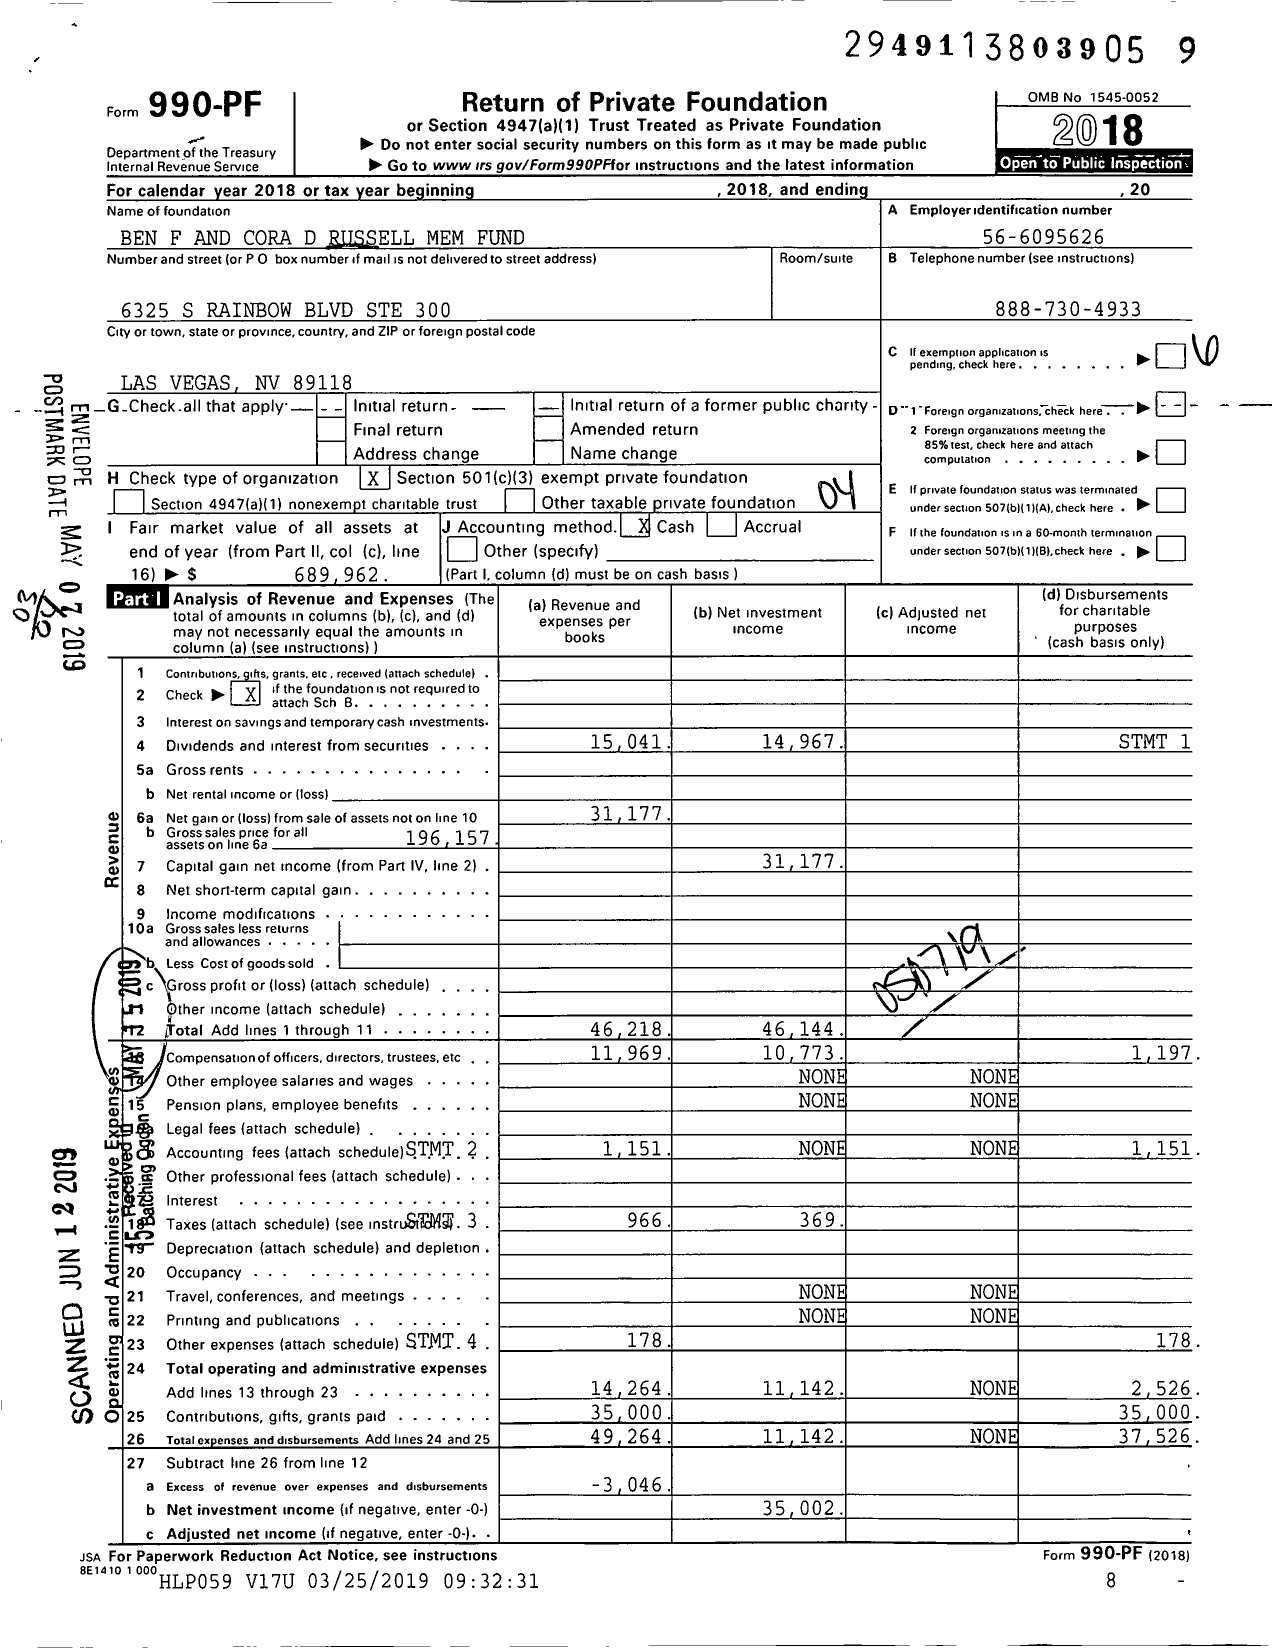 Image of first page of 2018 Form 990PF for Ben F and Cora D Russell Mem Fund